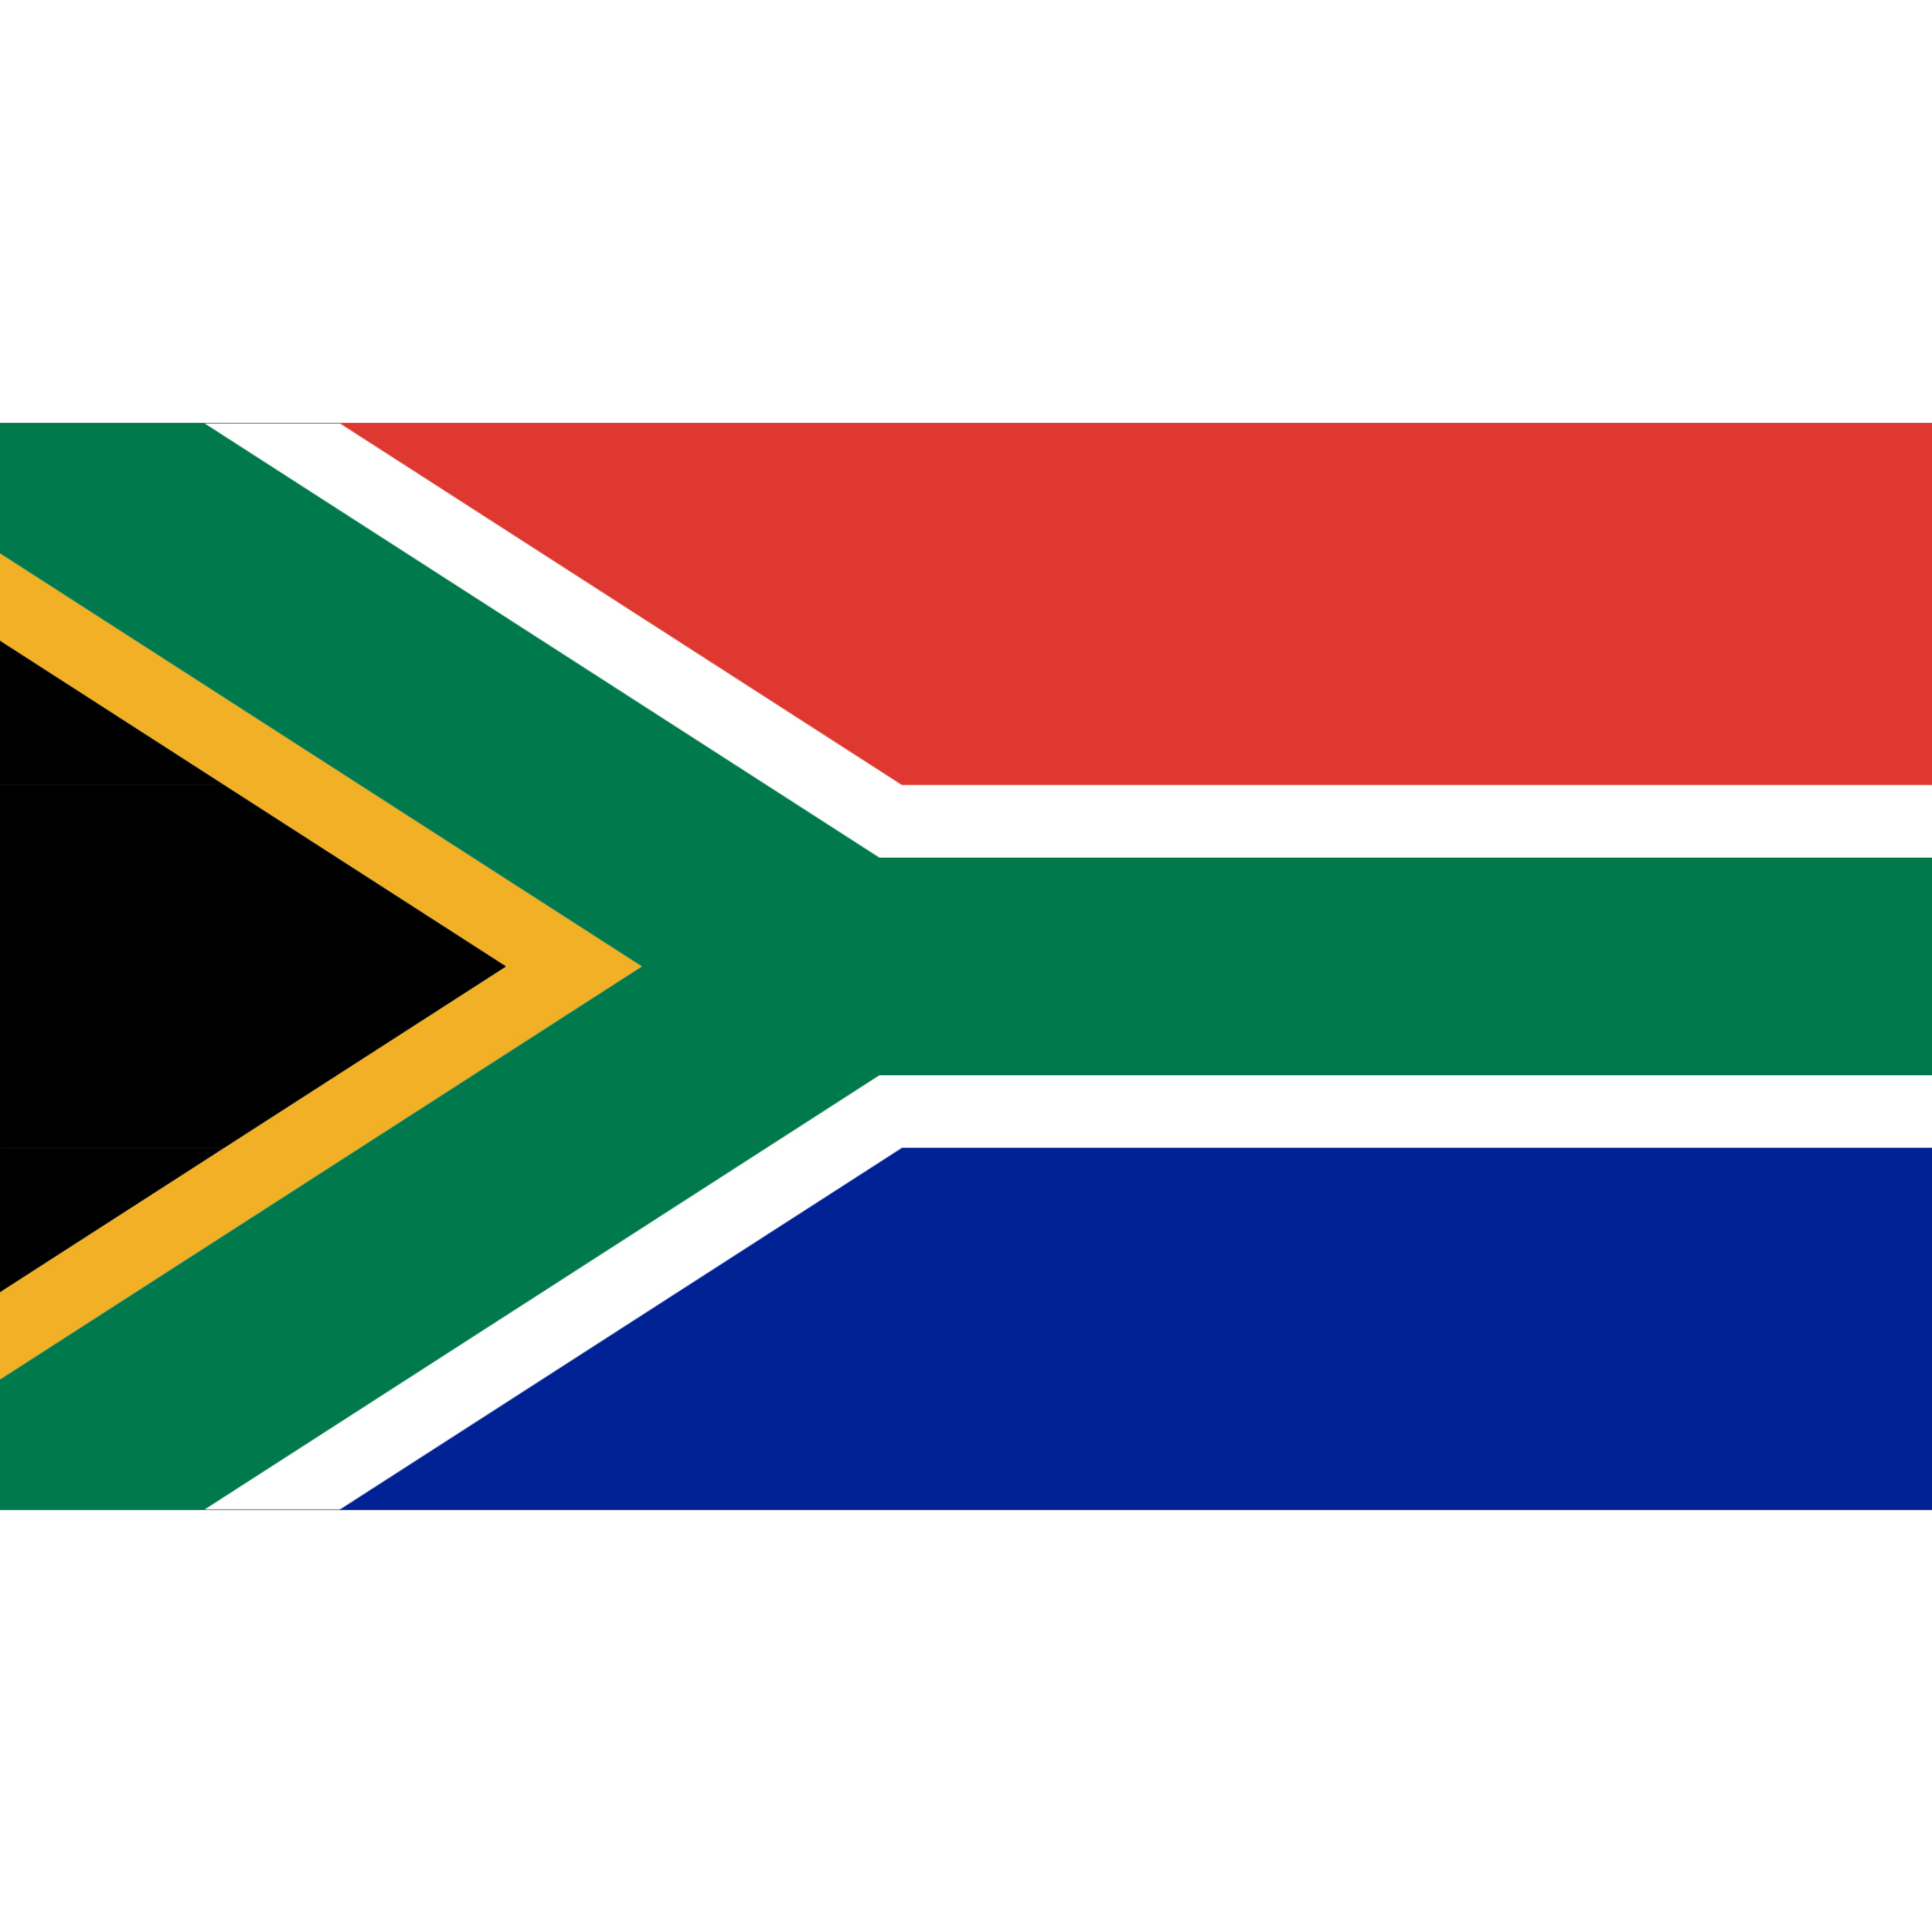 South Africa's flag has 2 horizontal bands in red and blue, separated by a green Y-shape and black triangle on the left.